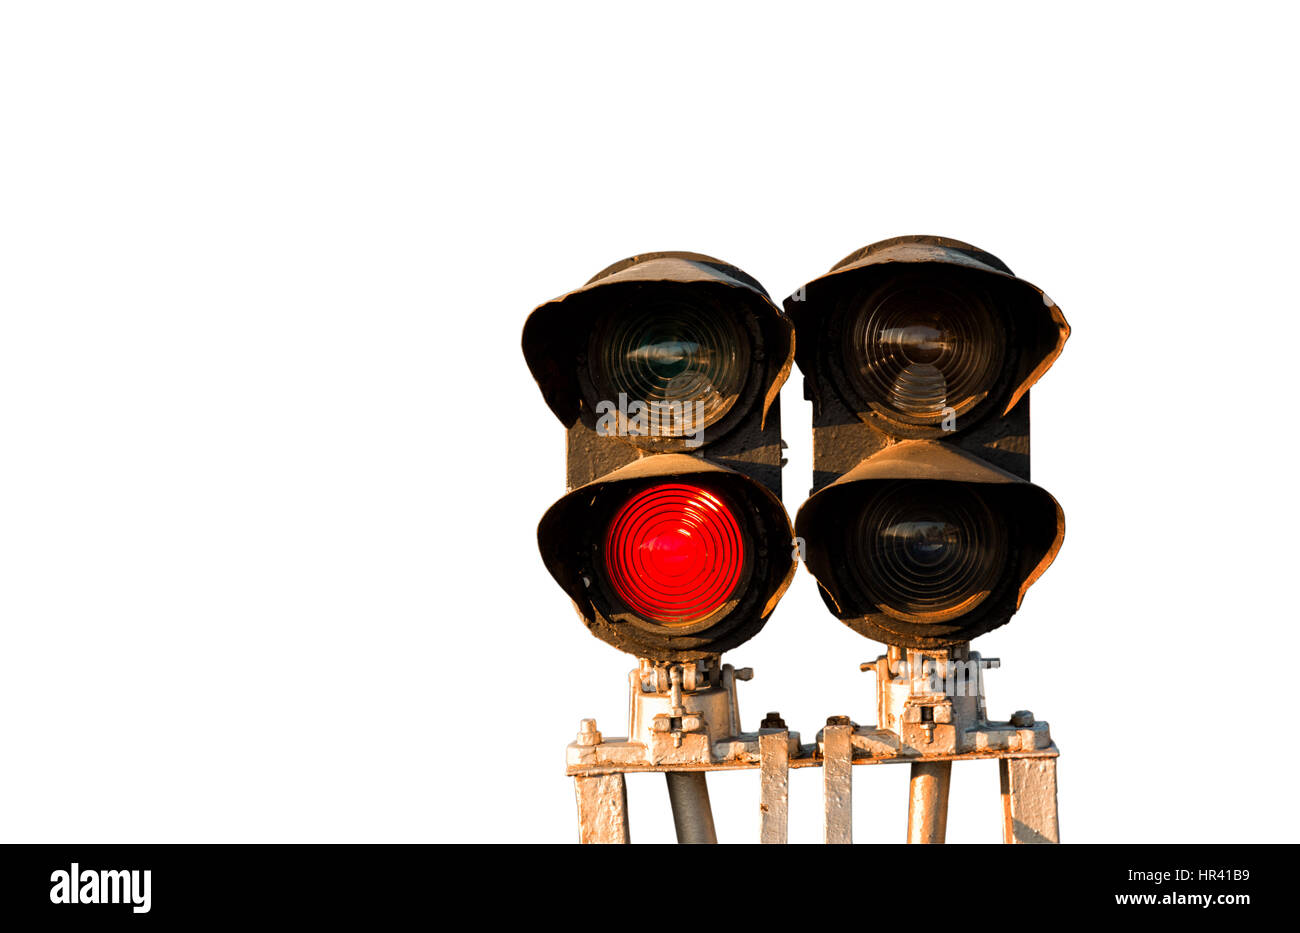 Traffic light shows red signal on railway isolated on white background Stock Photo